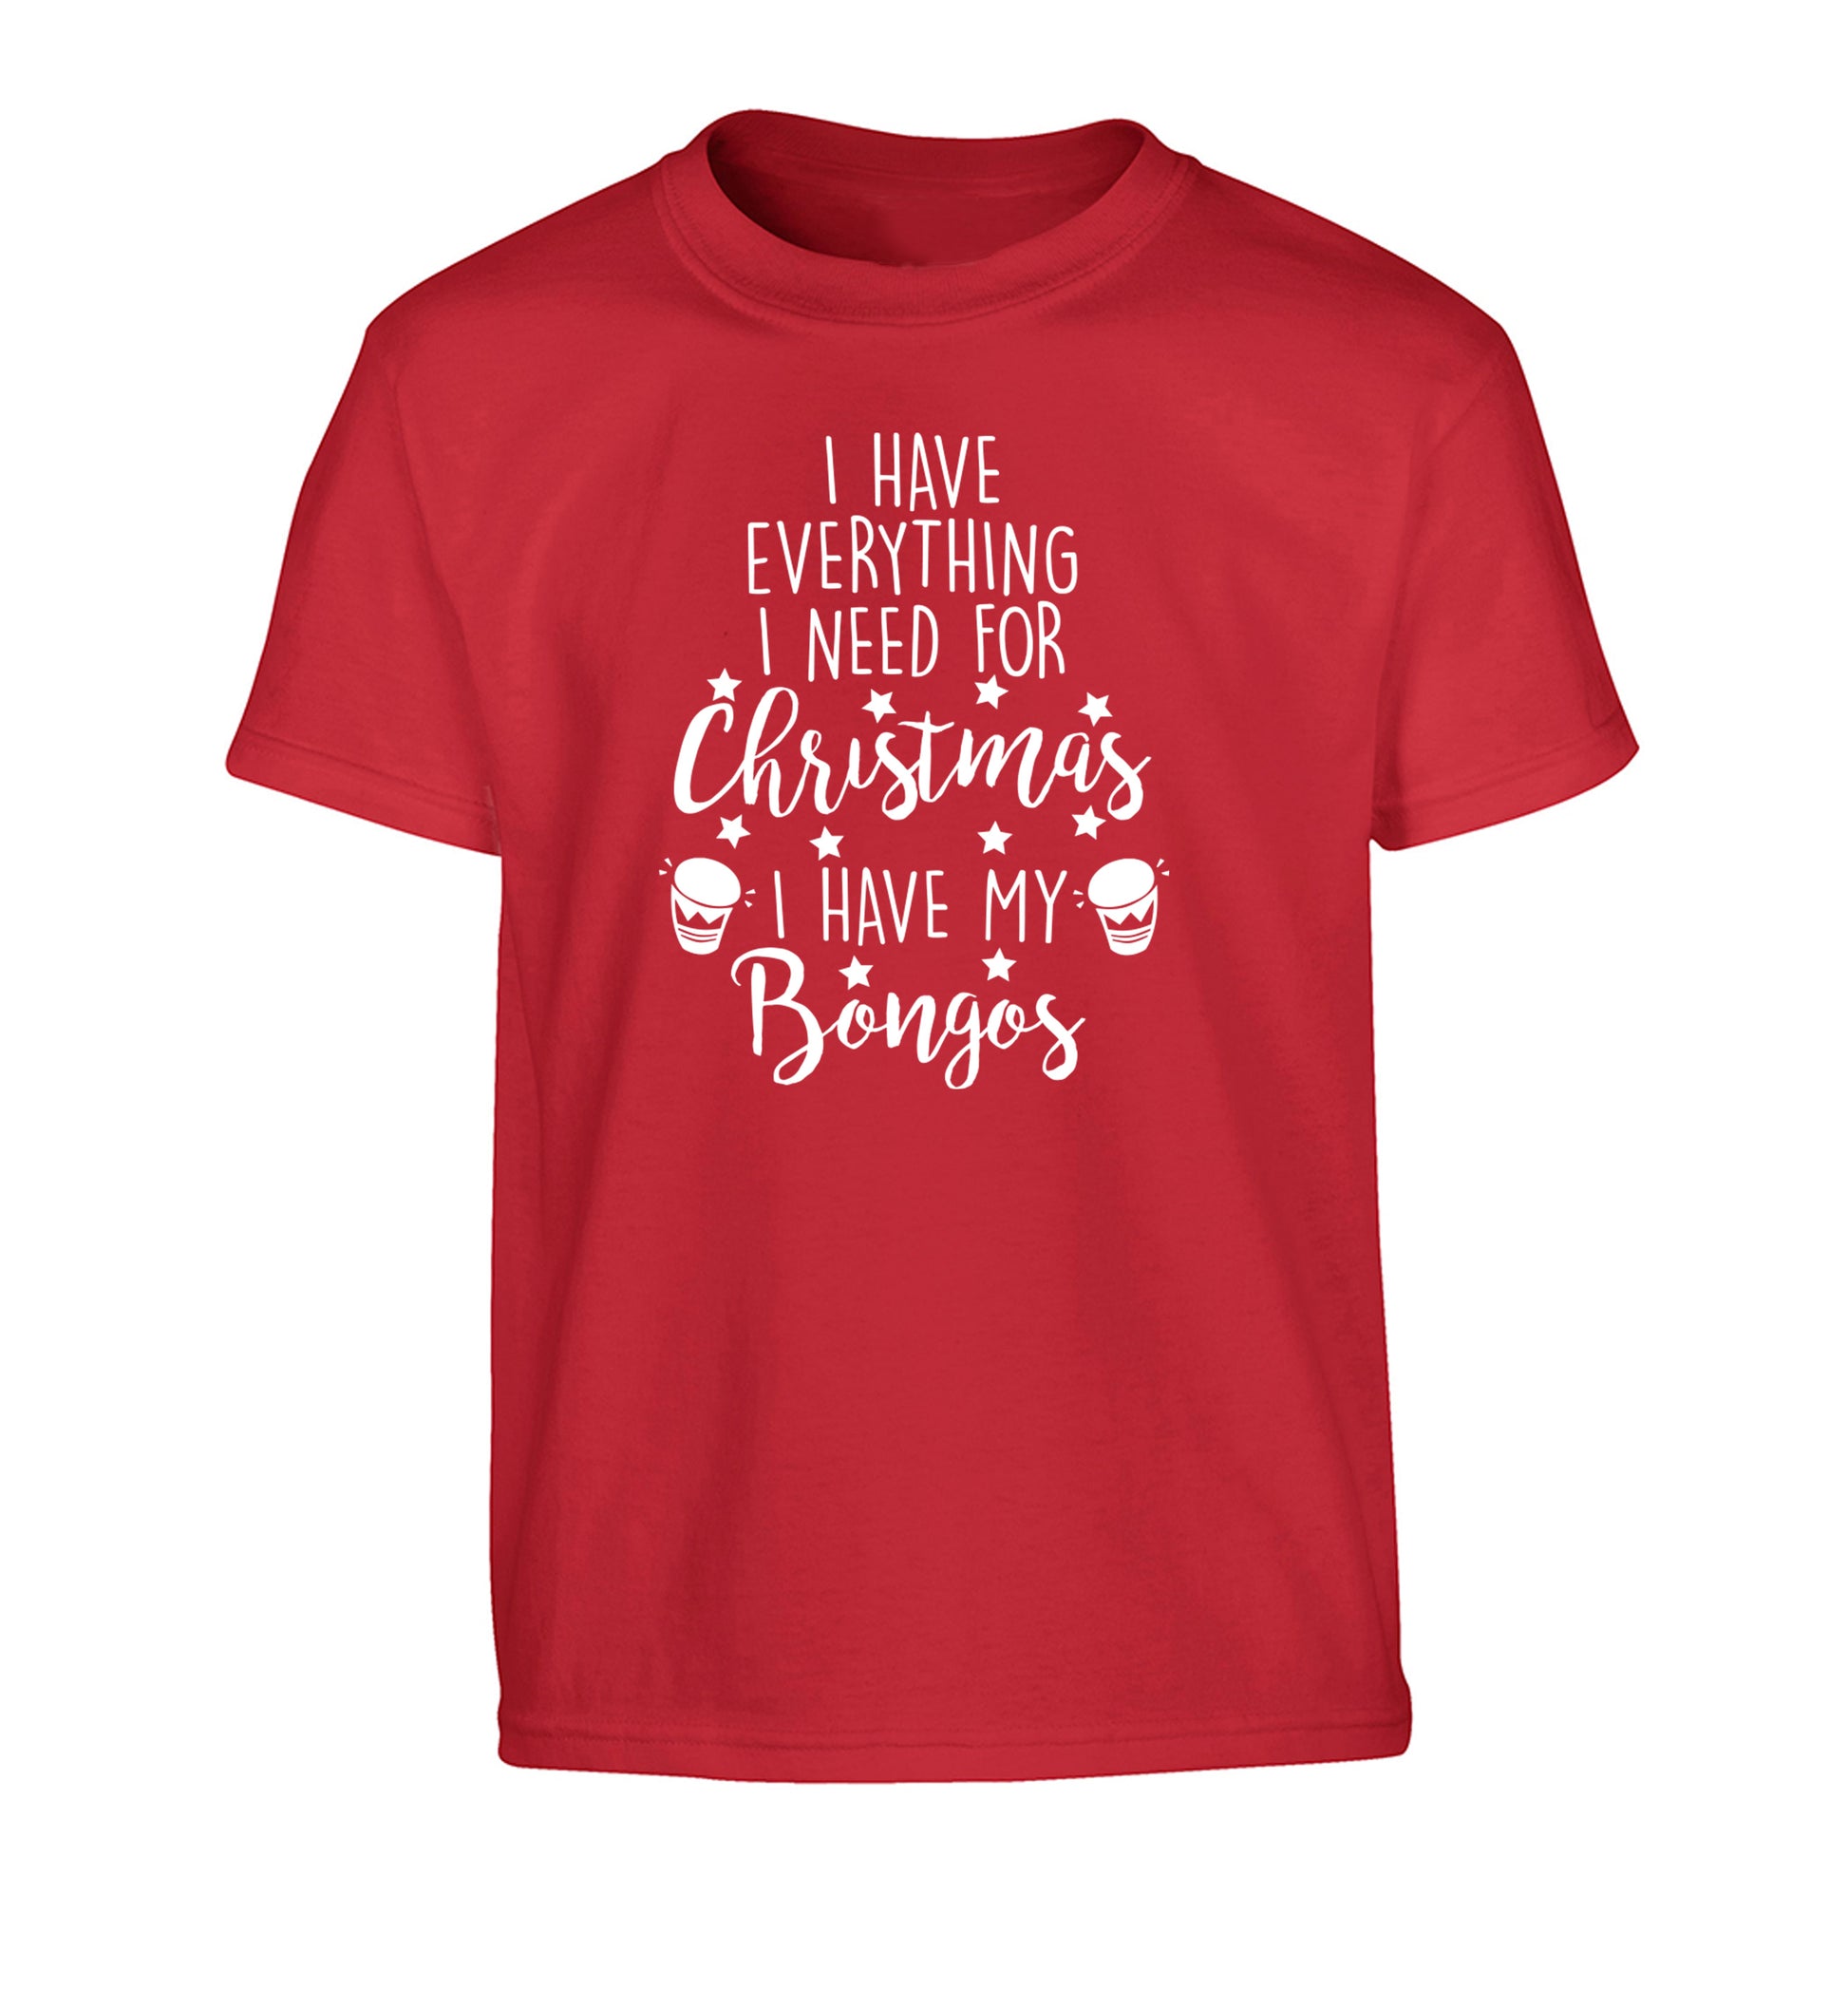 I have everything I need for Christmas I have my bongos! Children's red Tshirt 12-14 Years